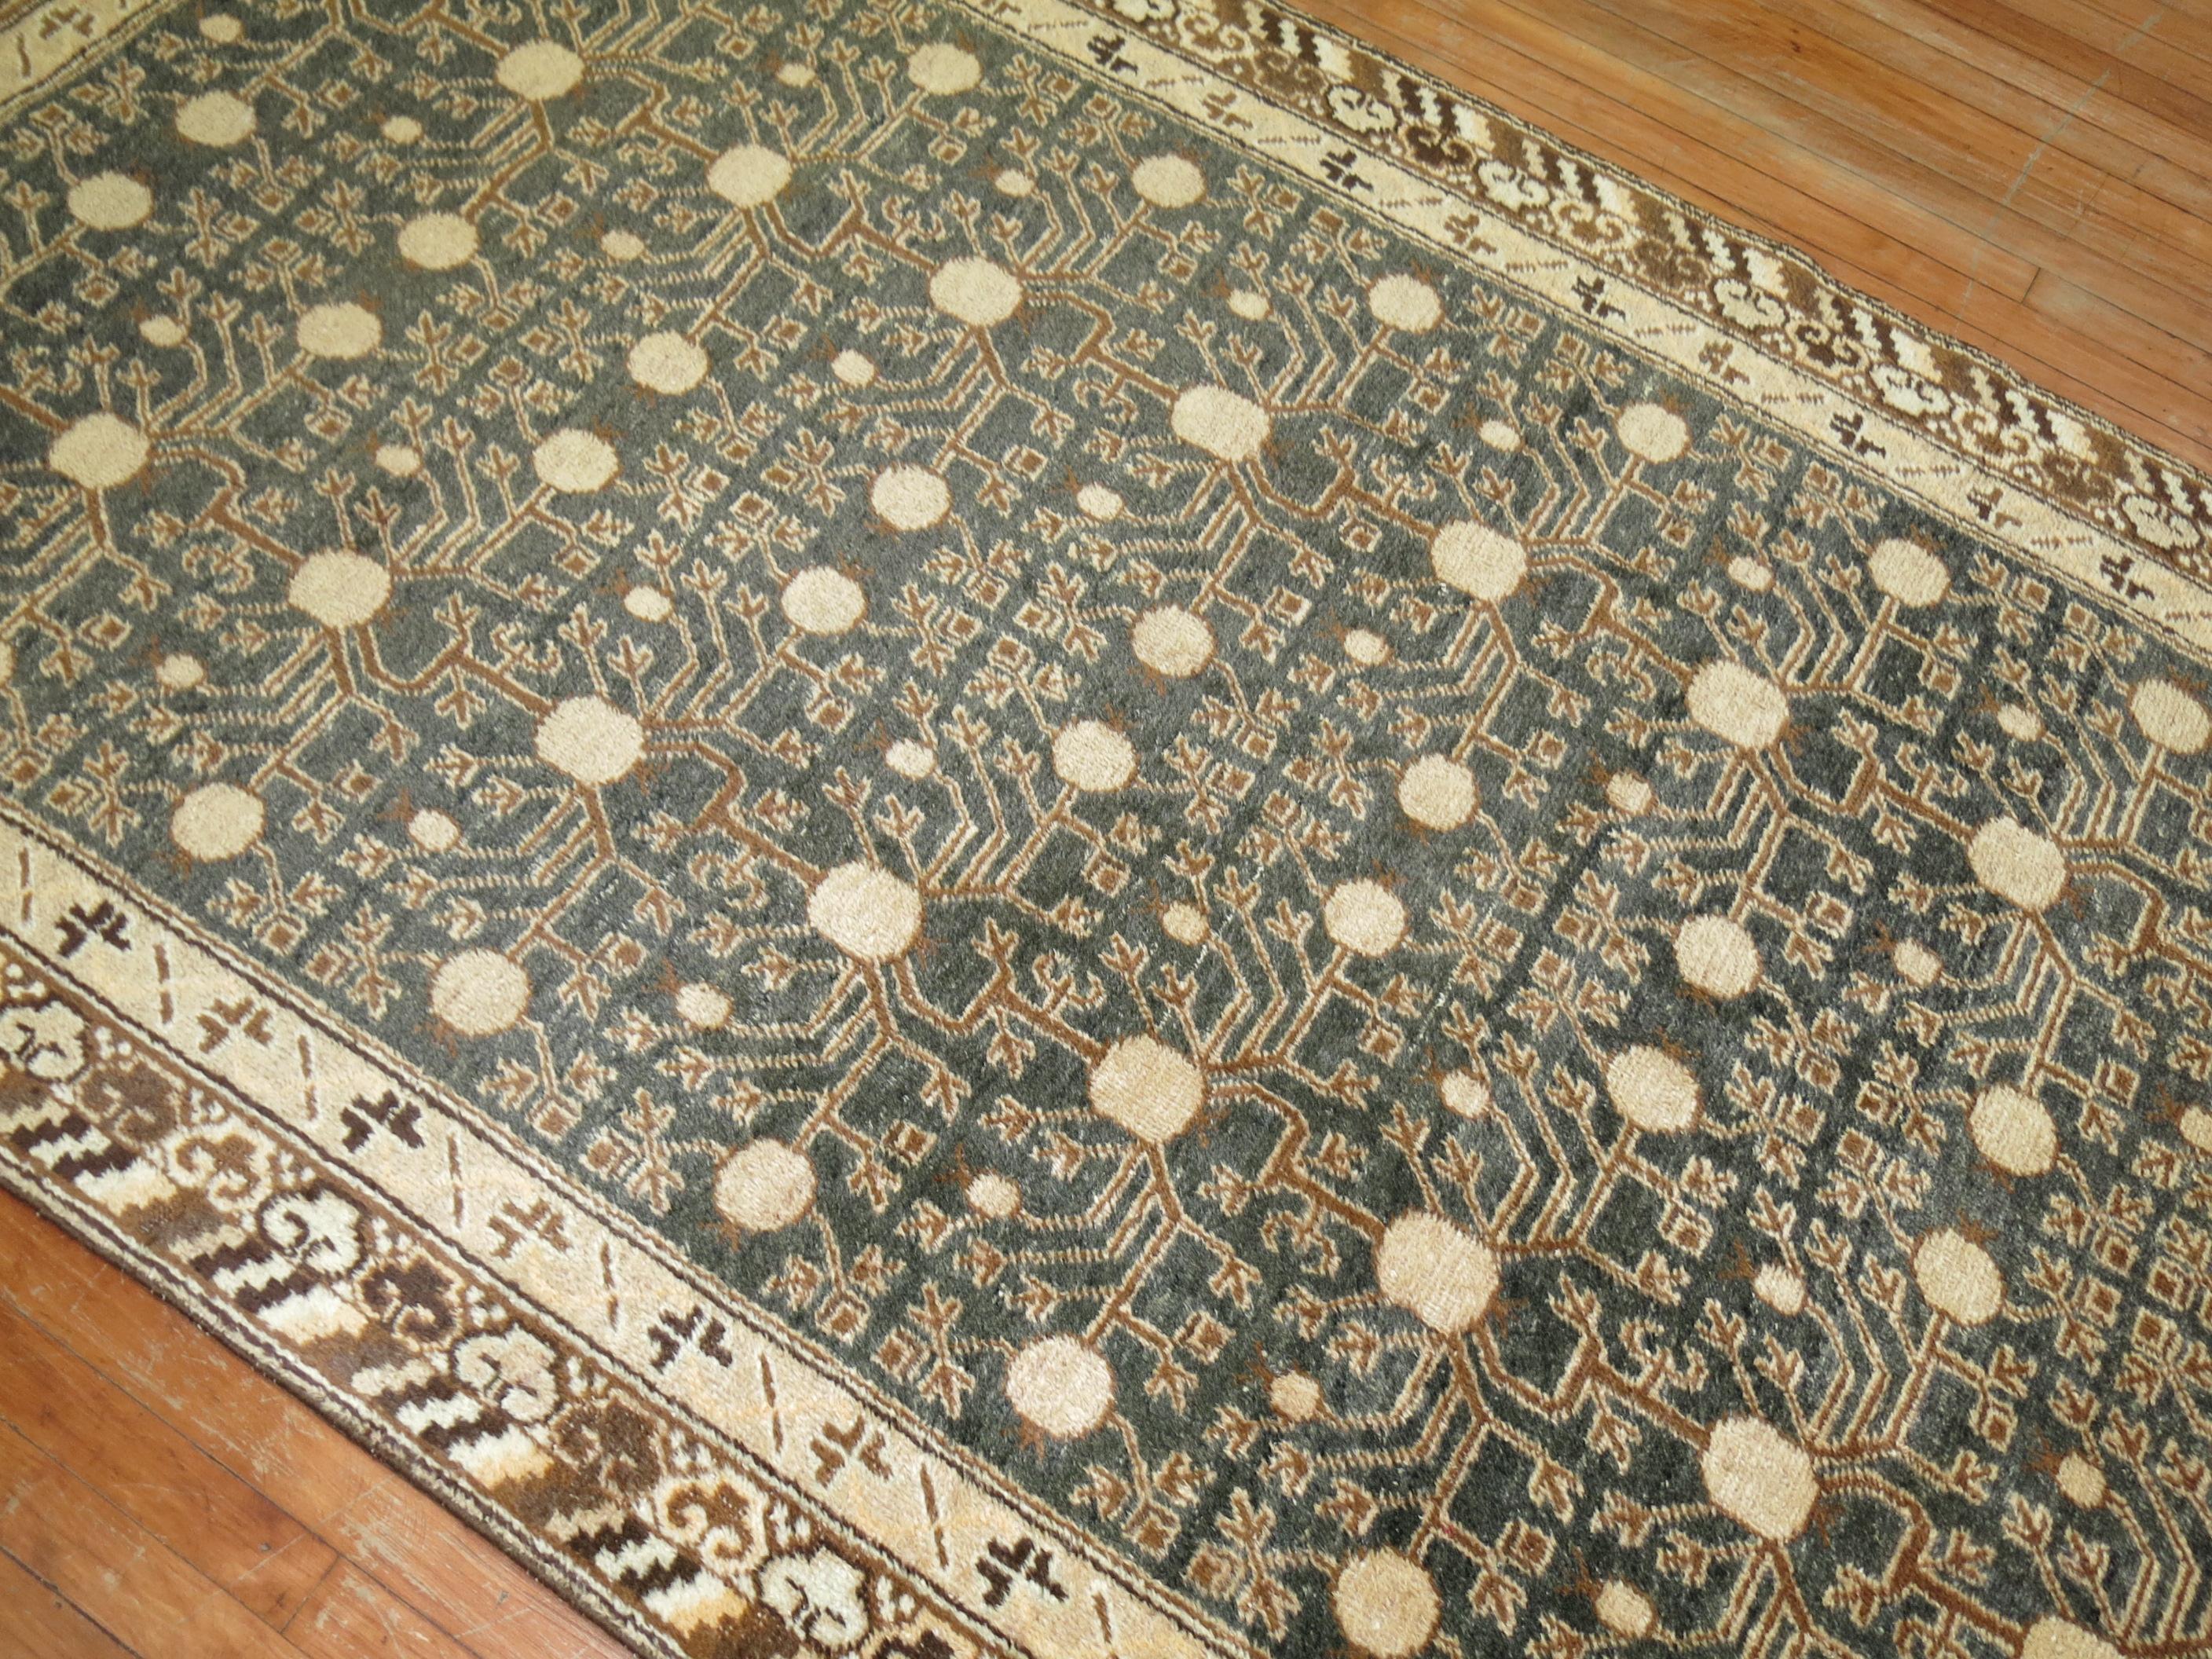 Khotan Rug in Olive Green and Brown 1